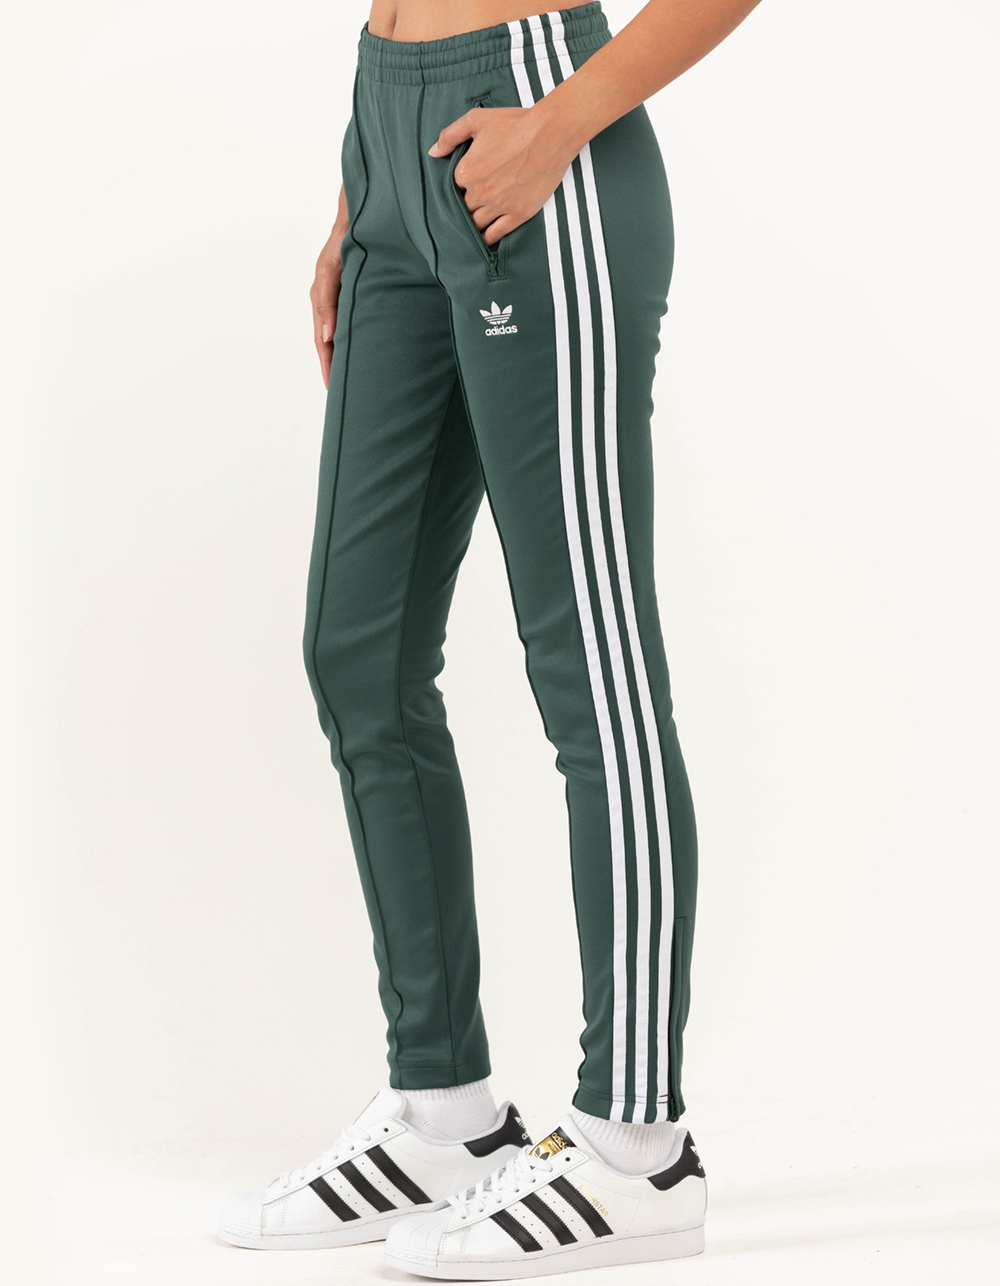 ADIDAS Primeblue SST Womens Track Pants - FOREST | Tillys